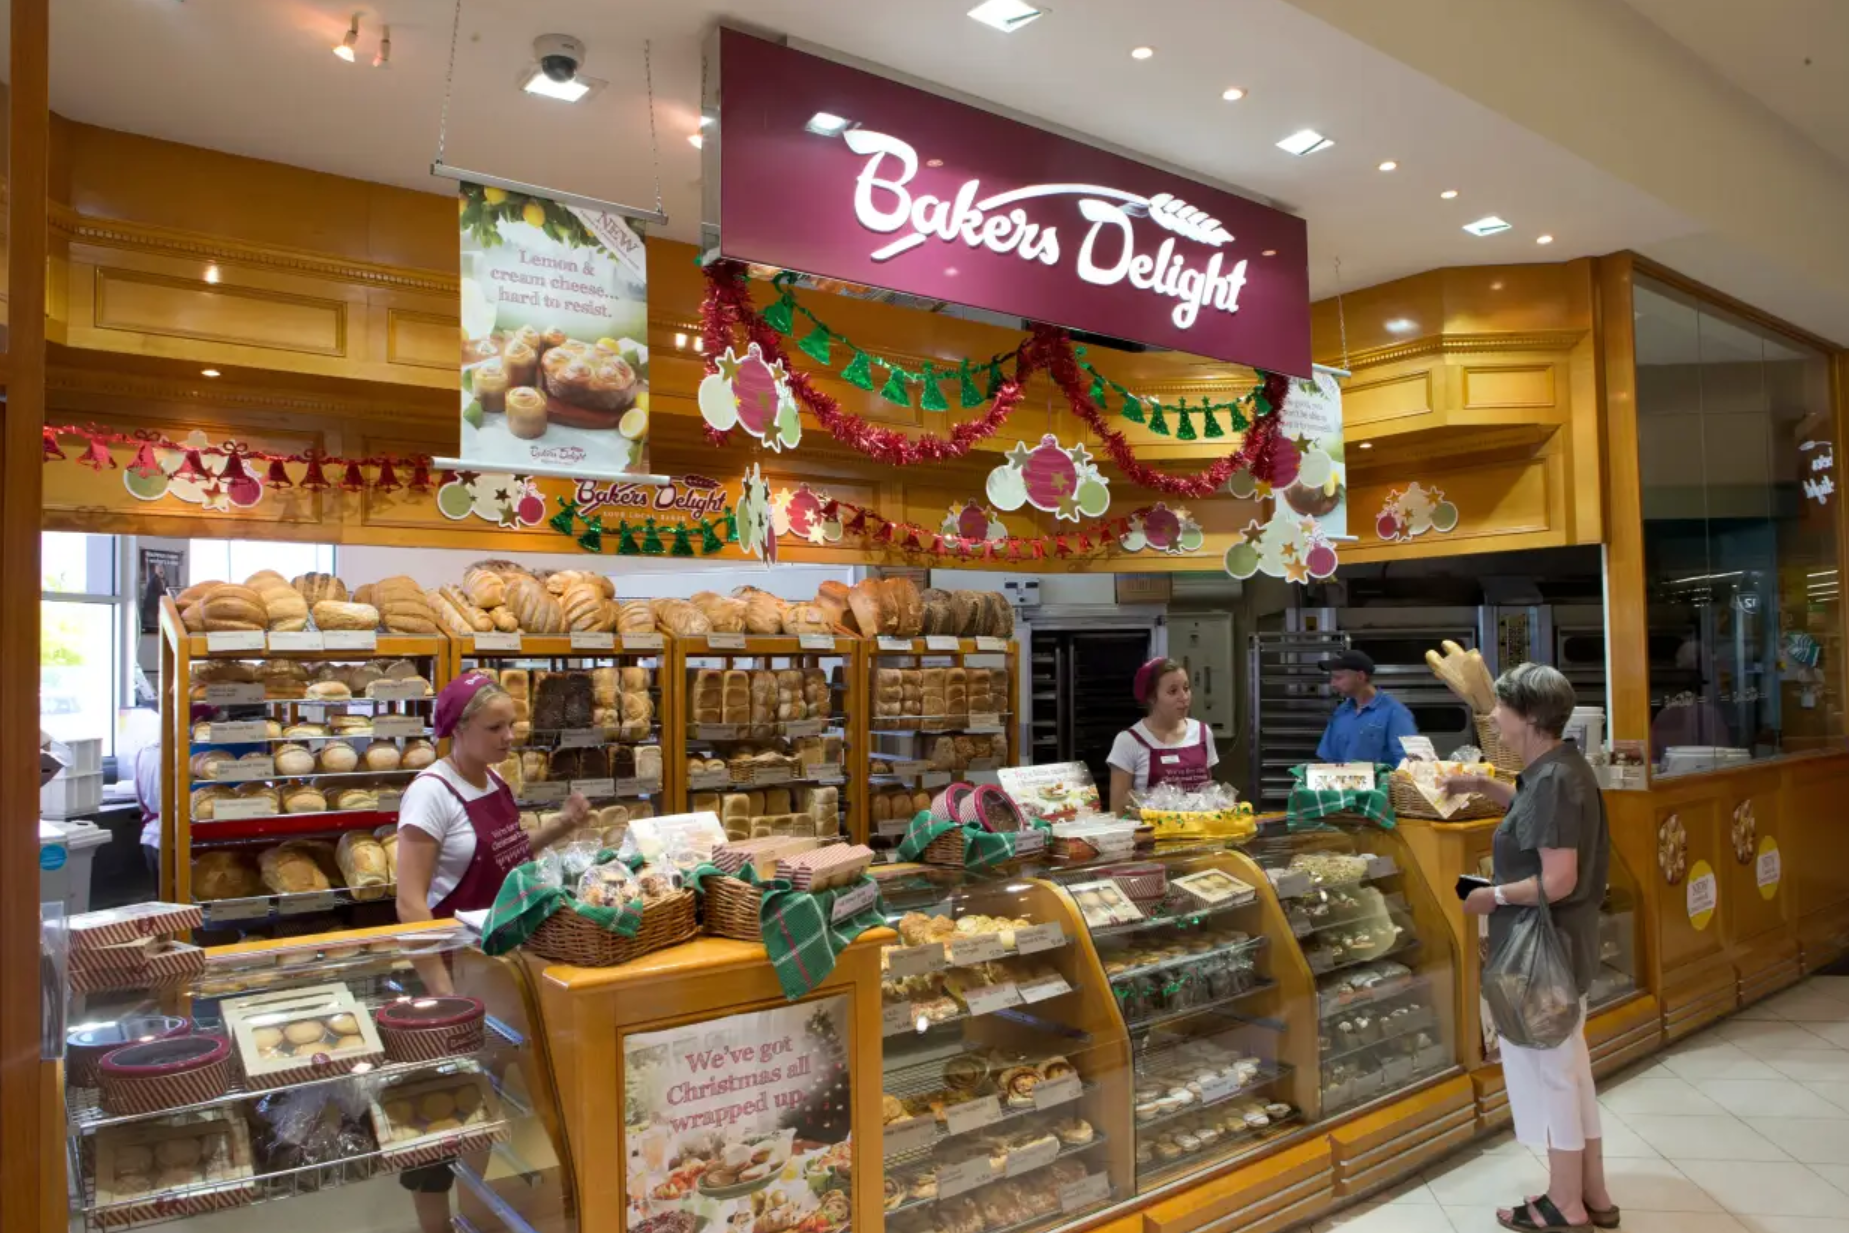 Bakers Delight faces court over franchisor liability for alleged franchisee underpayments